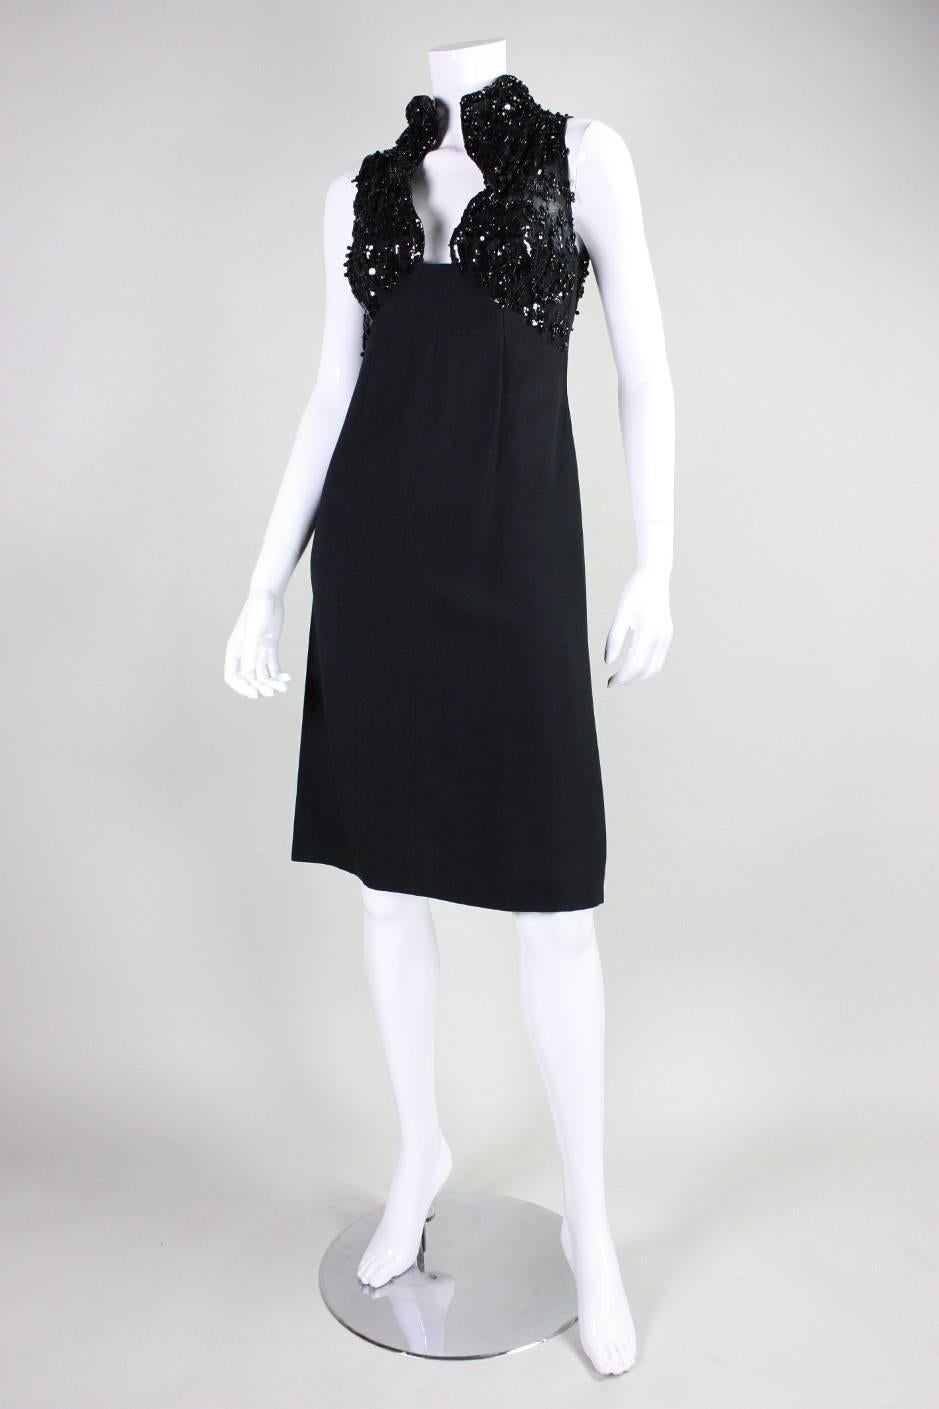 Vintage little black dress dates to the 1960's and is made of a mixture of lace and crepe.  Beaded bust has a deep v-neck and opening at back.  Center back zipper.  Unlined.  Unfortunately the label is no longer present.  The original owner